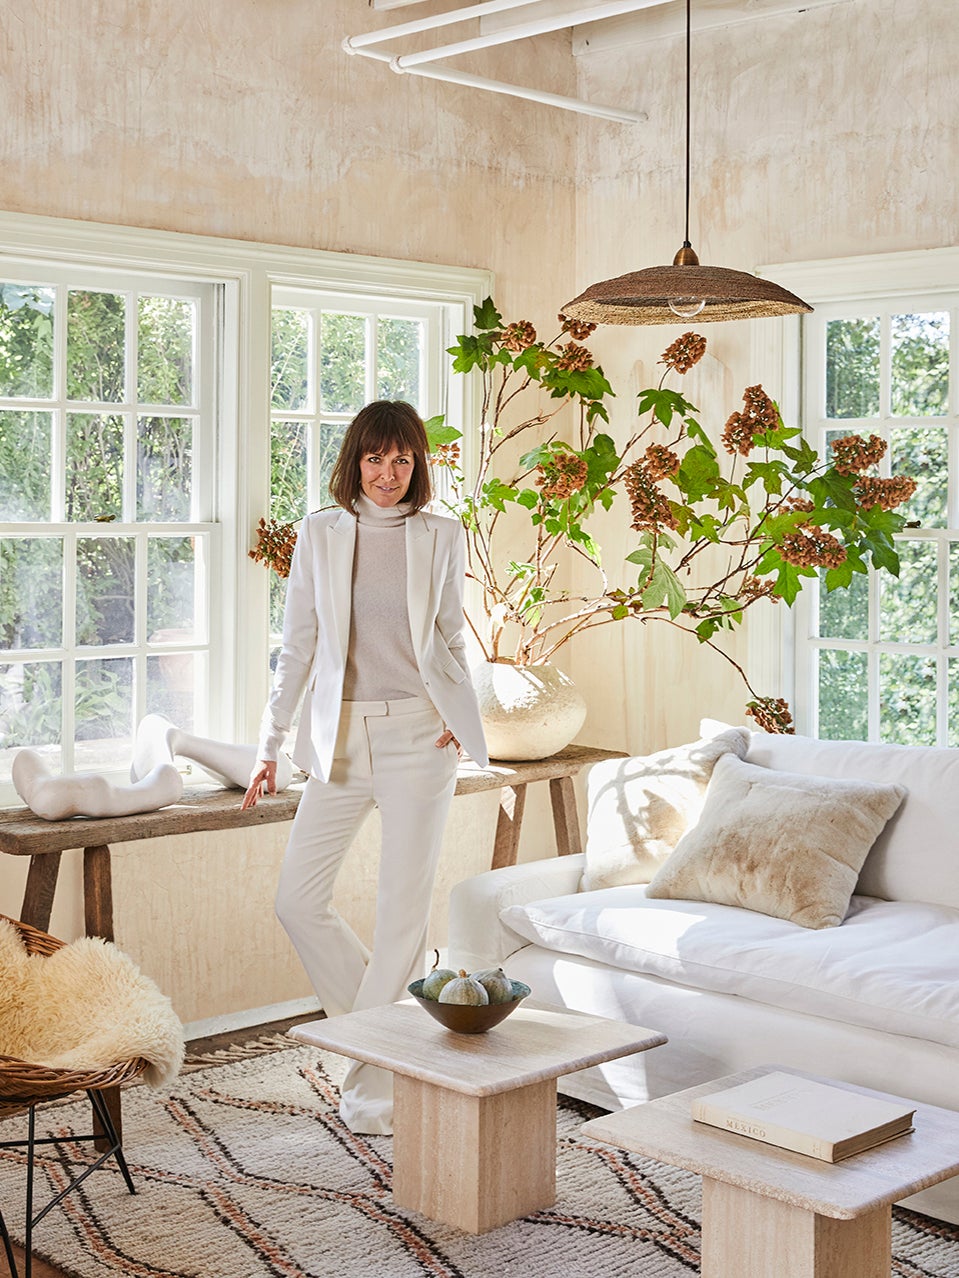 Our Cover Star, Leanne Ford, Renovated Her New Home the Only Way She Knows How